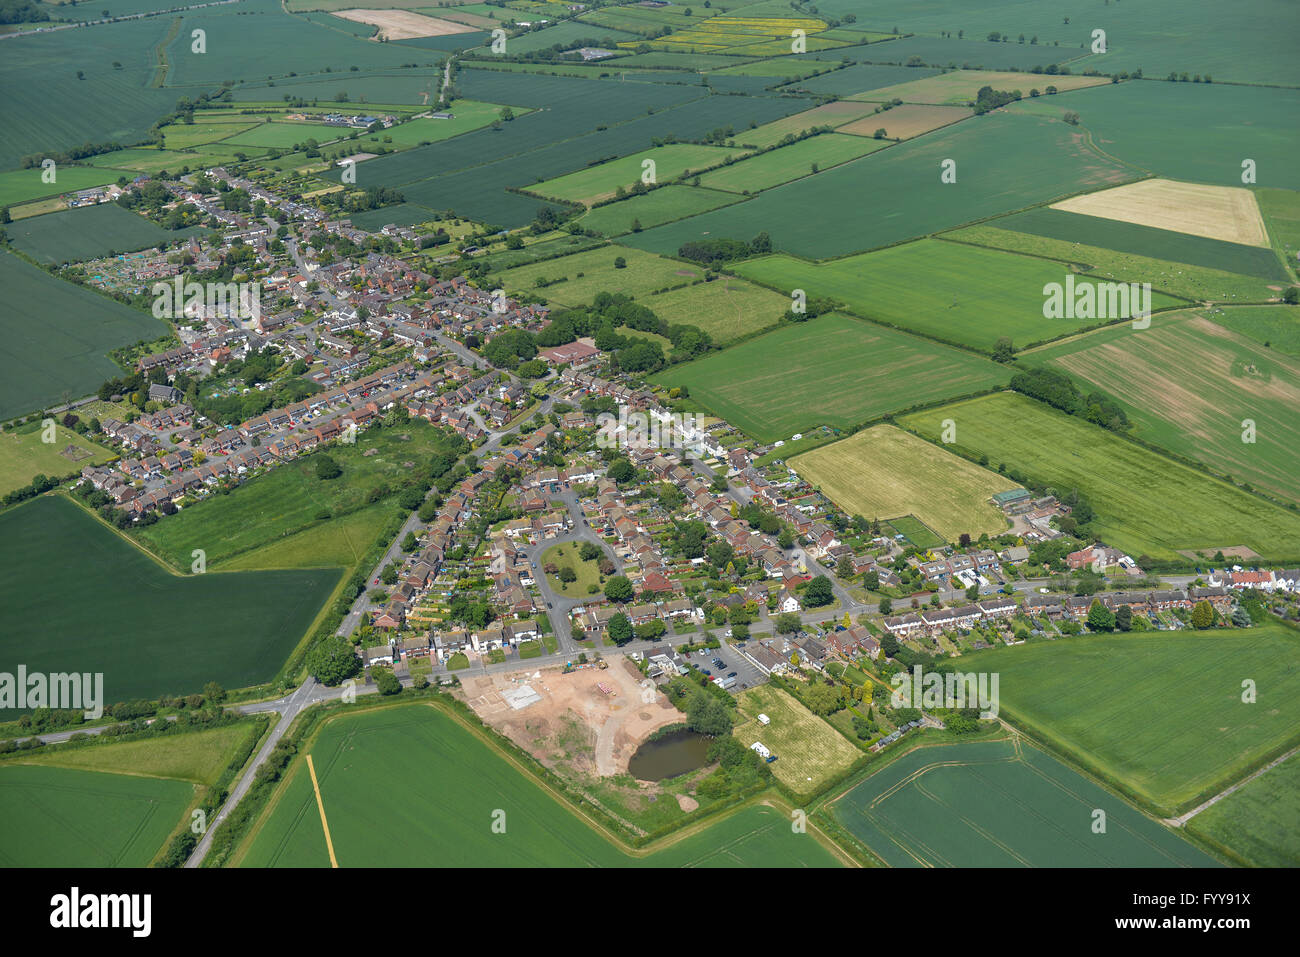 An aerial view of the village of Warton and surrounding Warwickshire countryside Stock Photo